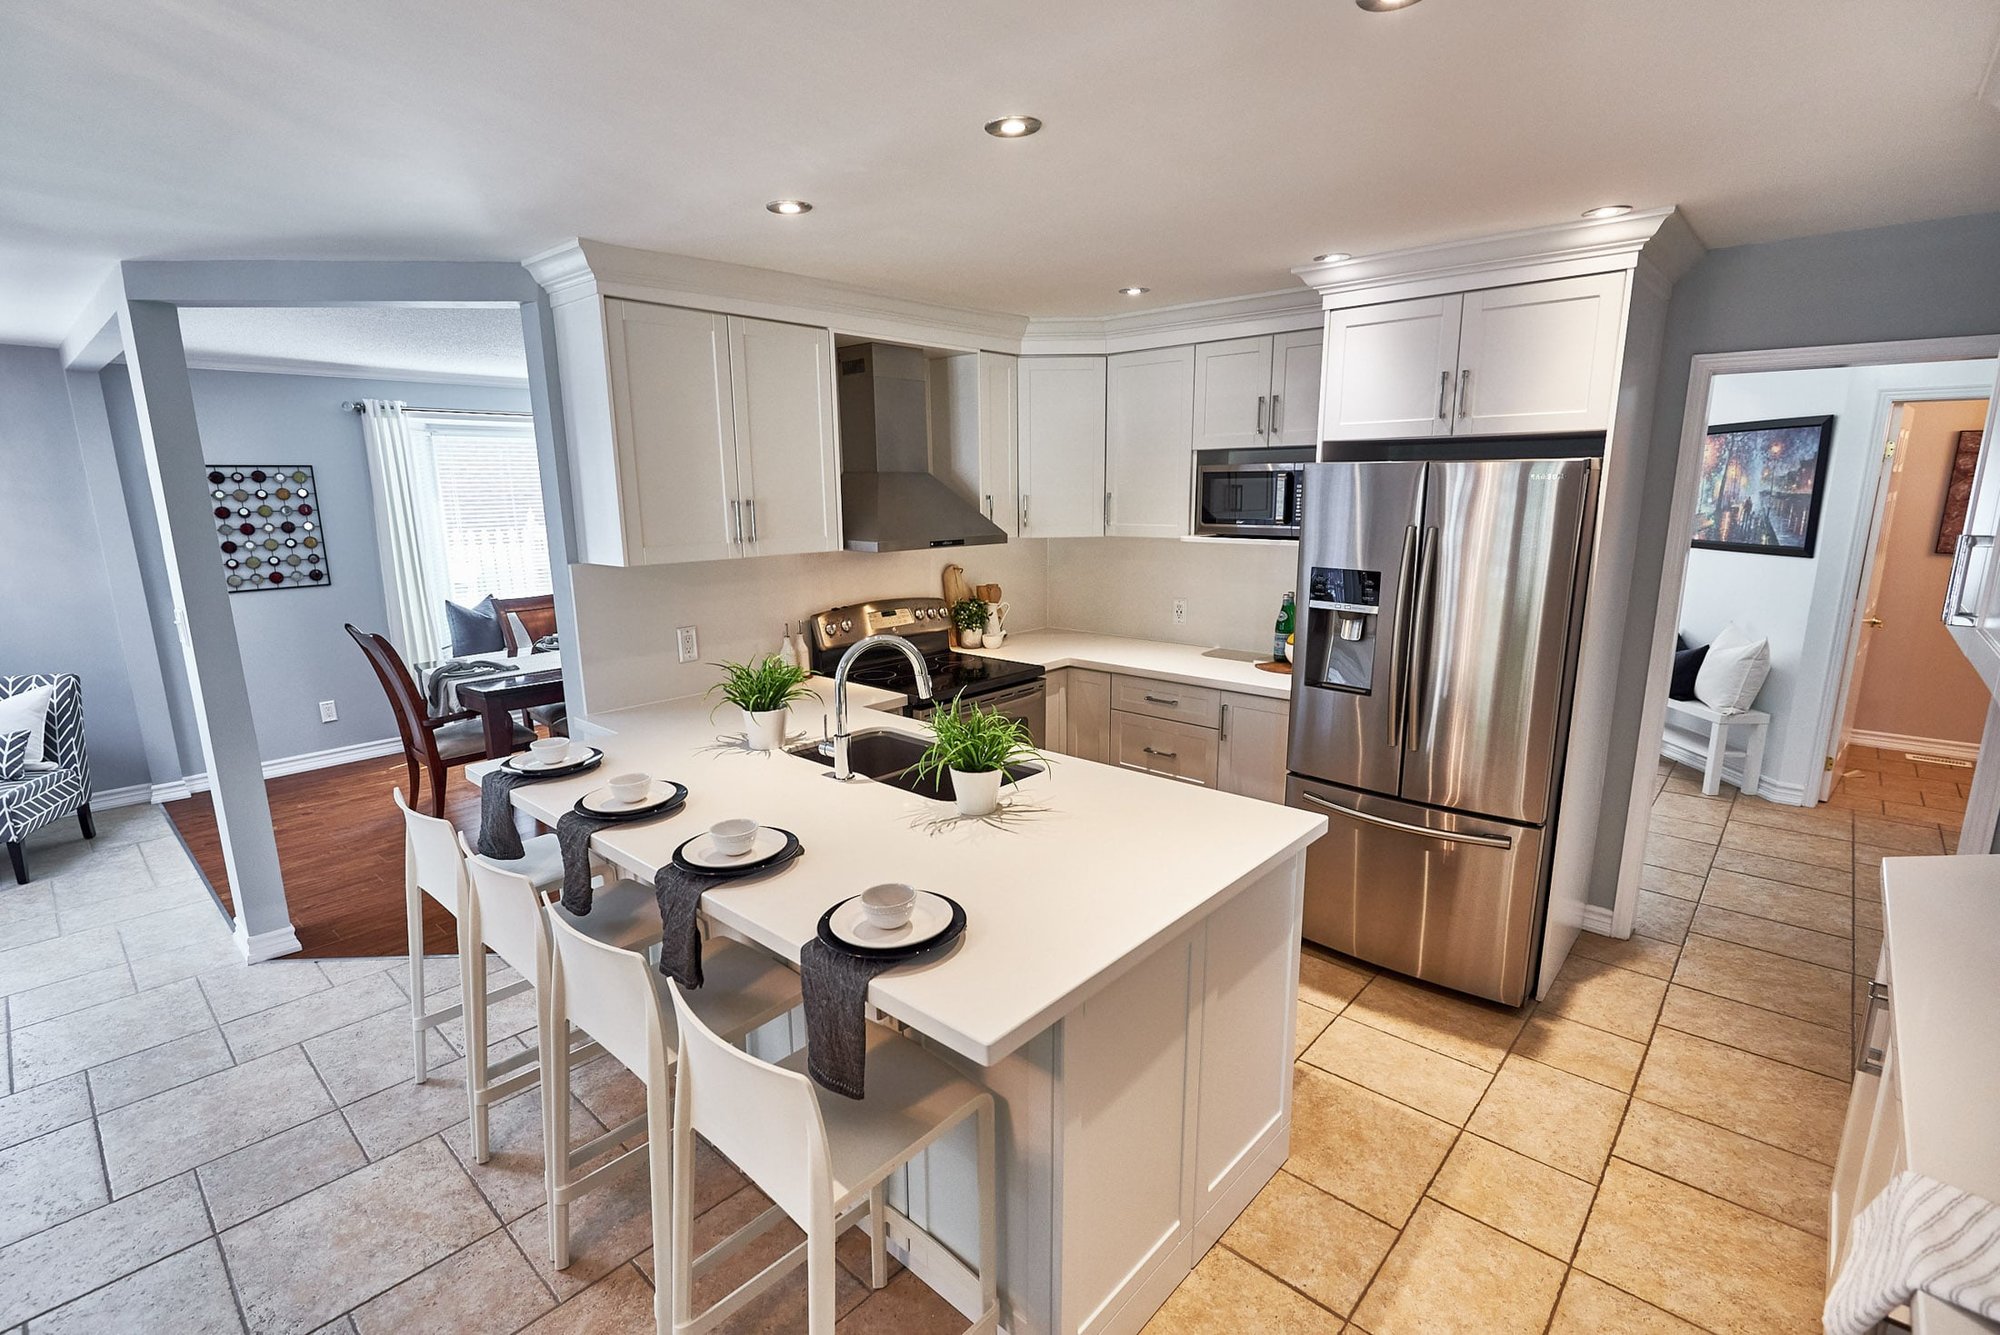 Modern kitchen in a home for sale in Clarington, Ontario